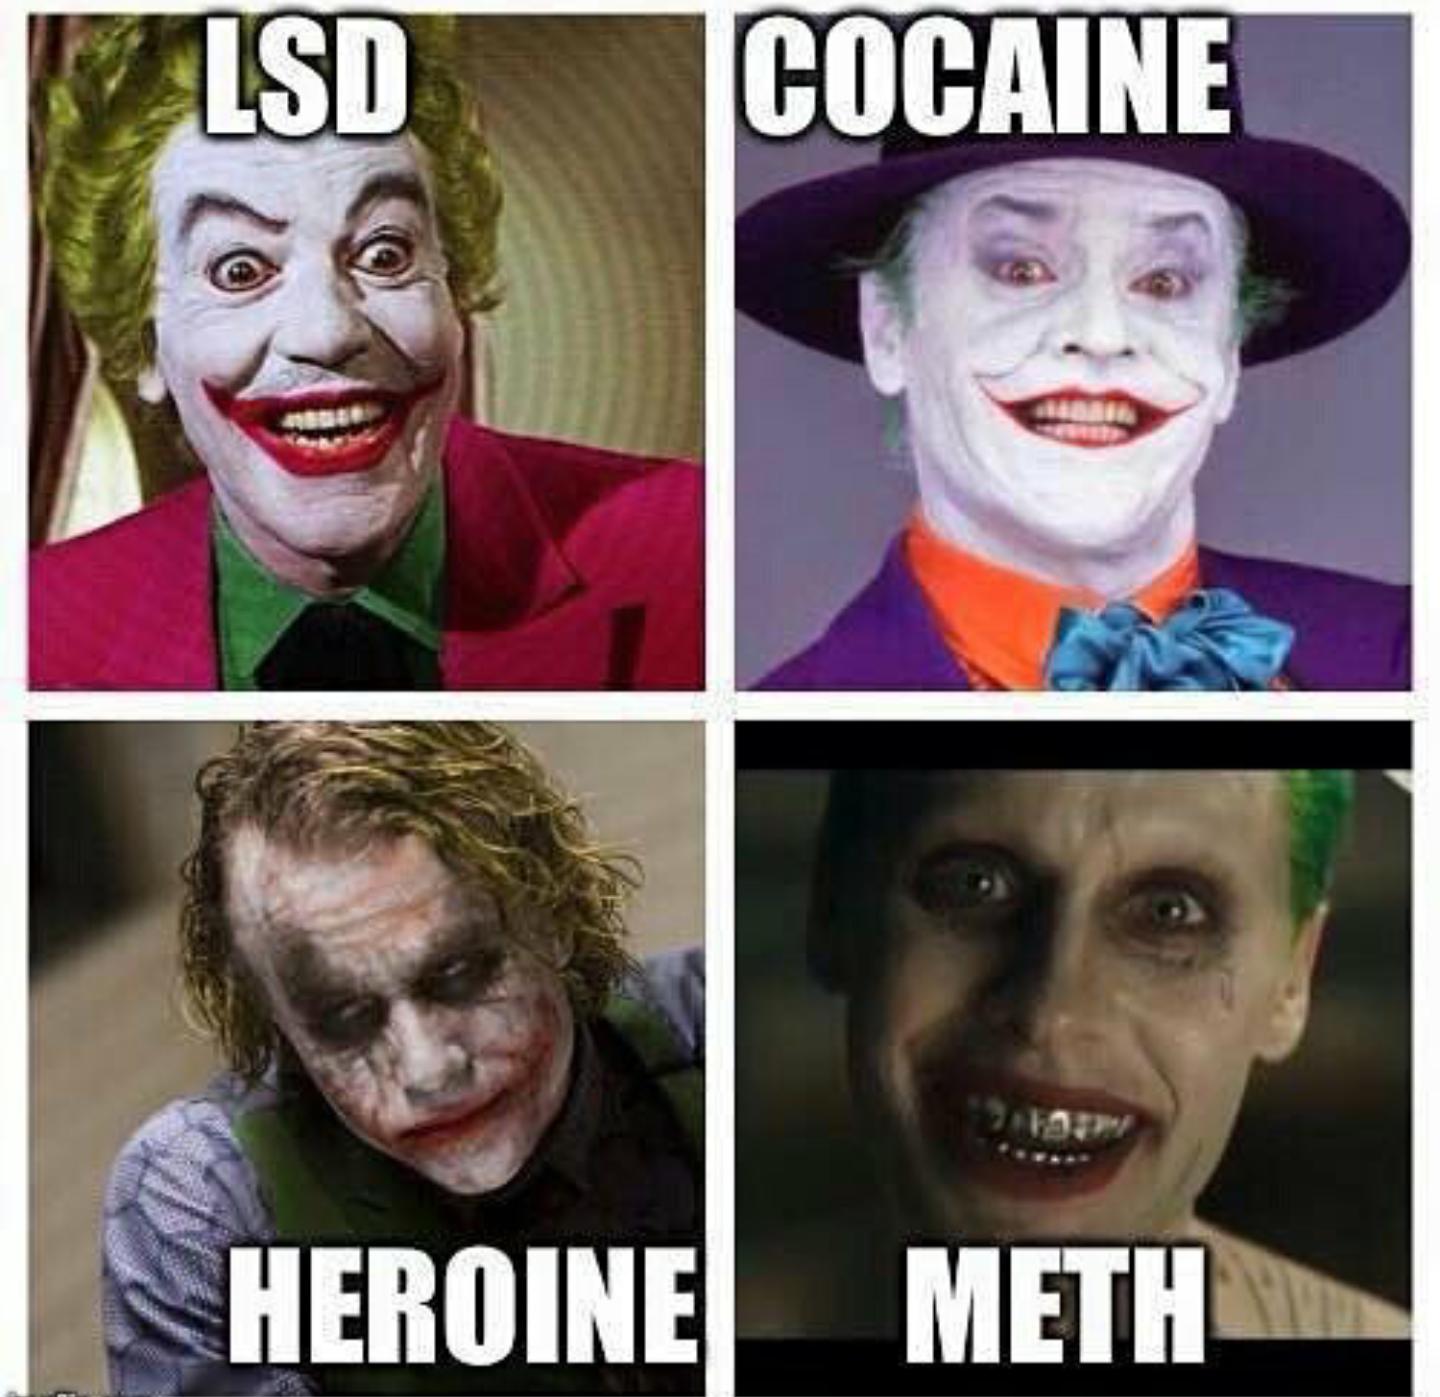 Jokers depiction informs us of each decades drug of choice